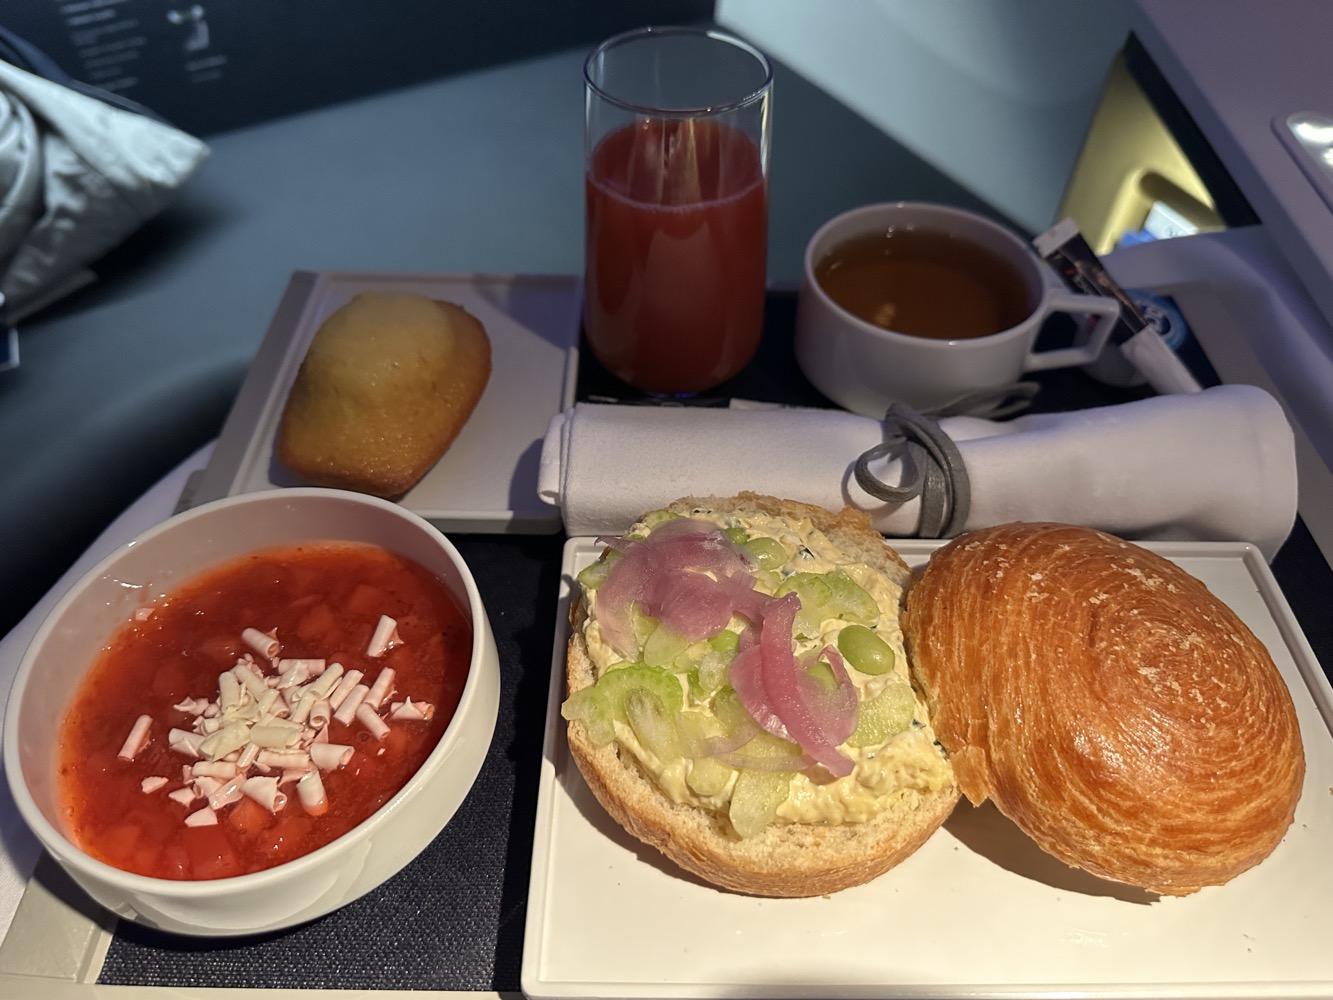 2nd meal before landing. A cold brioche bun with egg salad. I think this meal is fairly simple and can be improved.